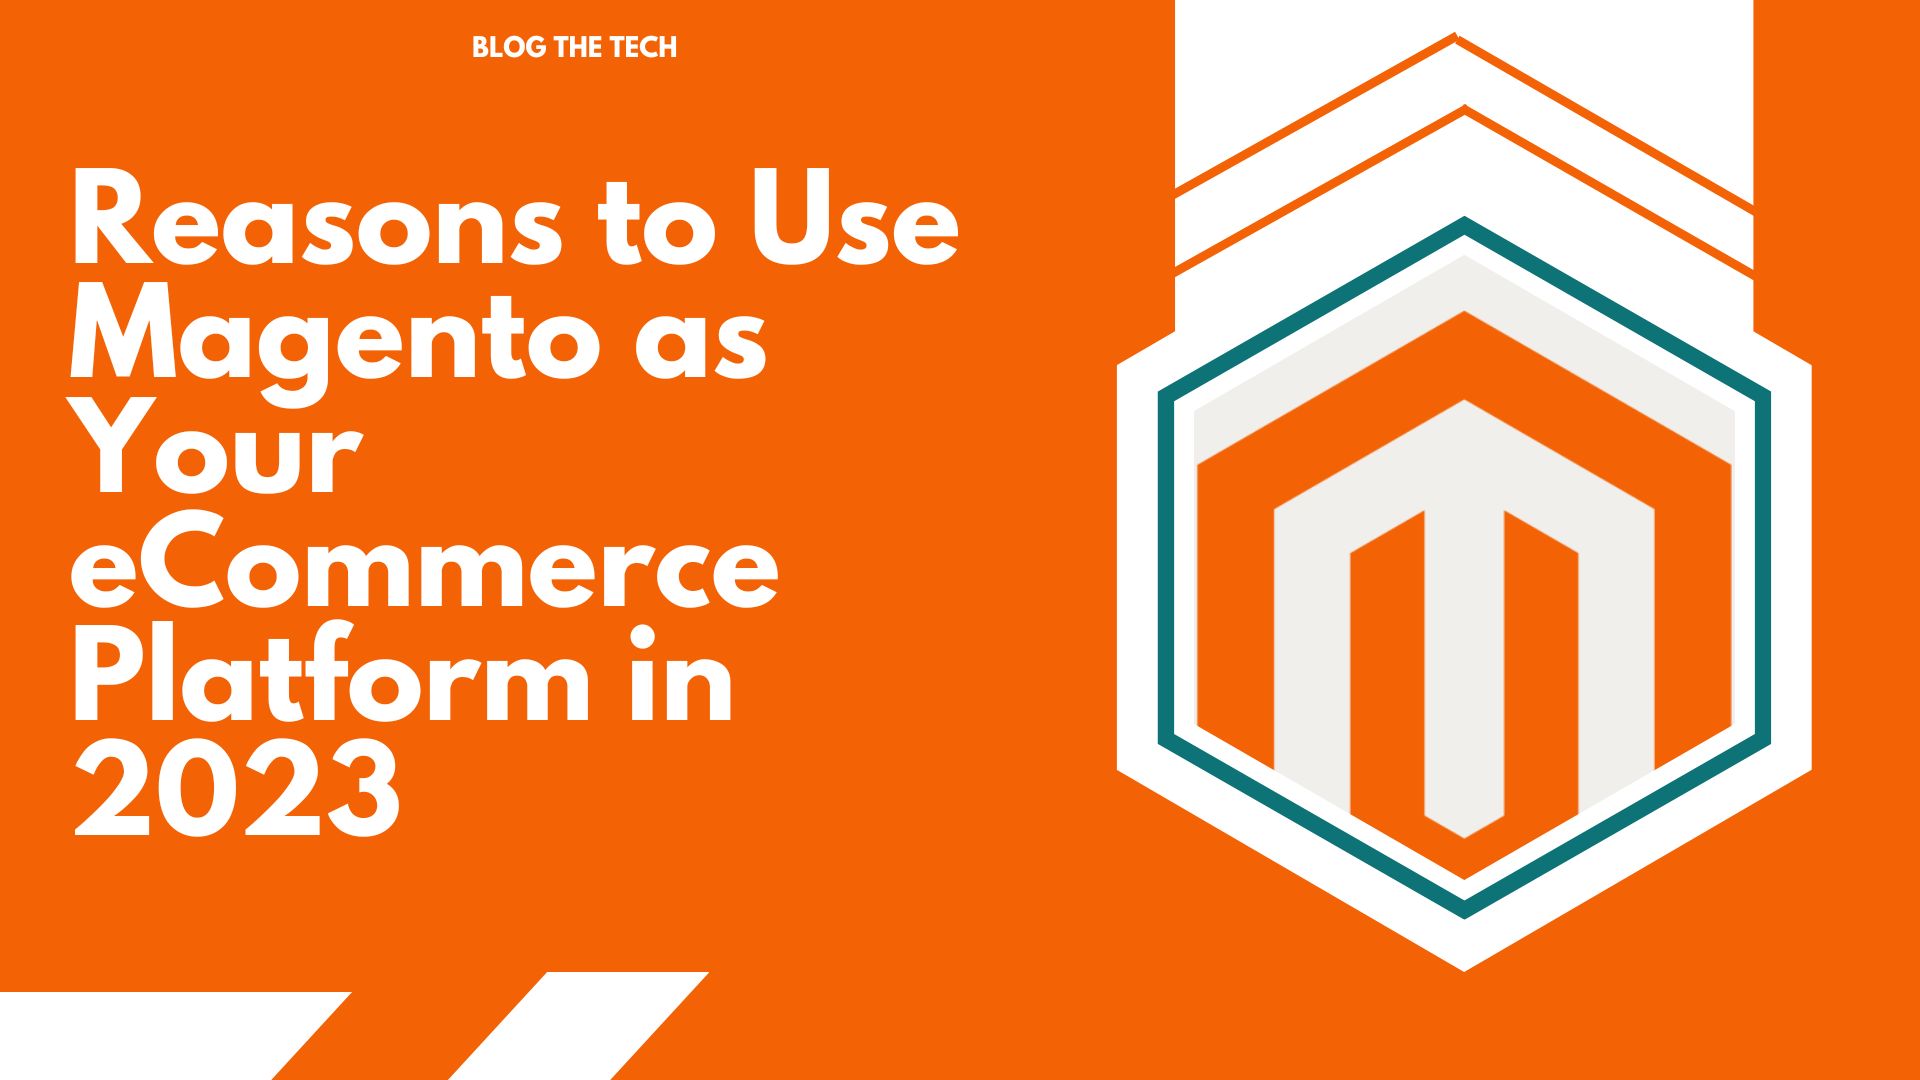 Reasons to Use Magento as Your eCommerce Platform in 2023